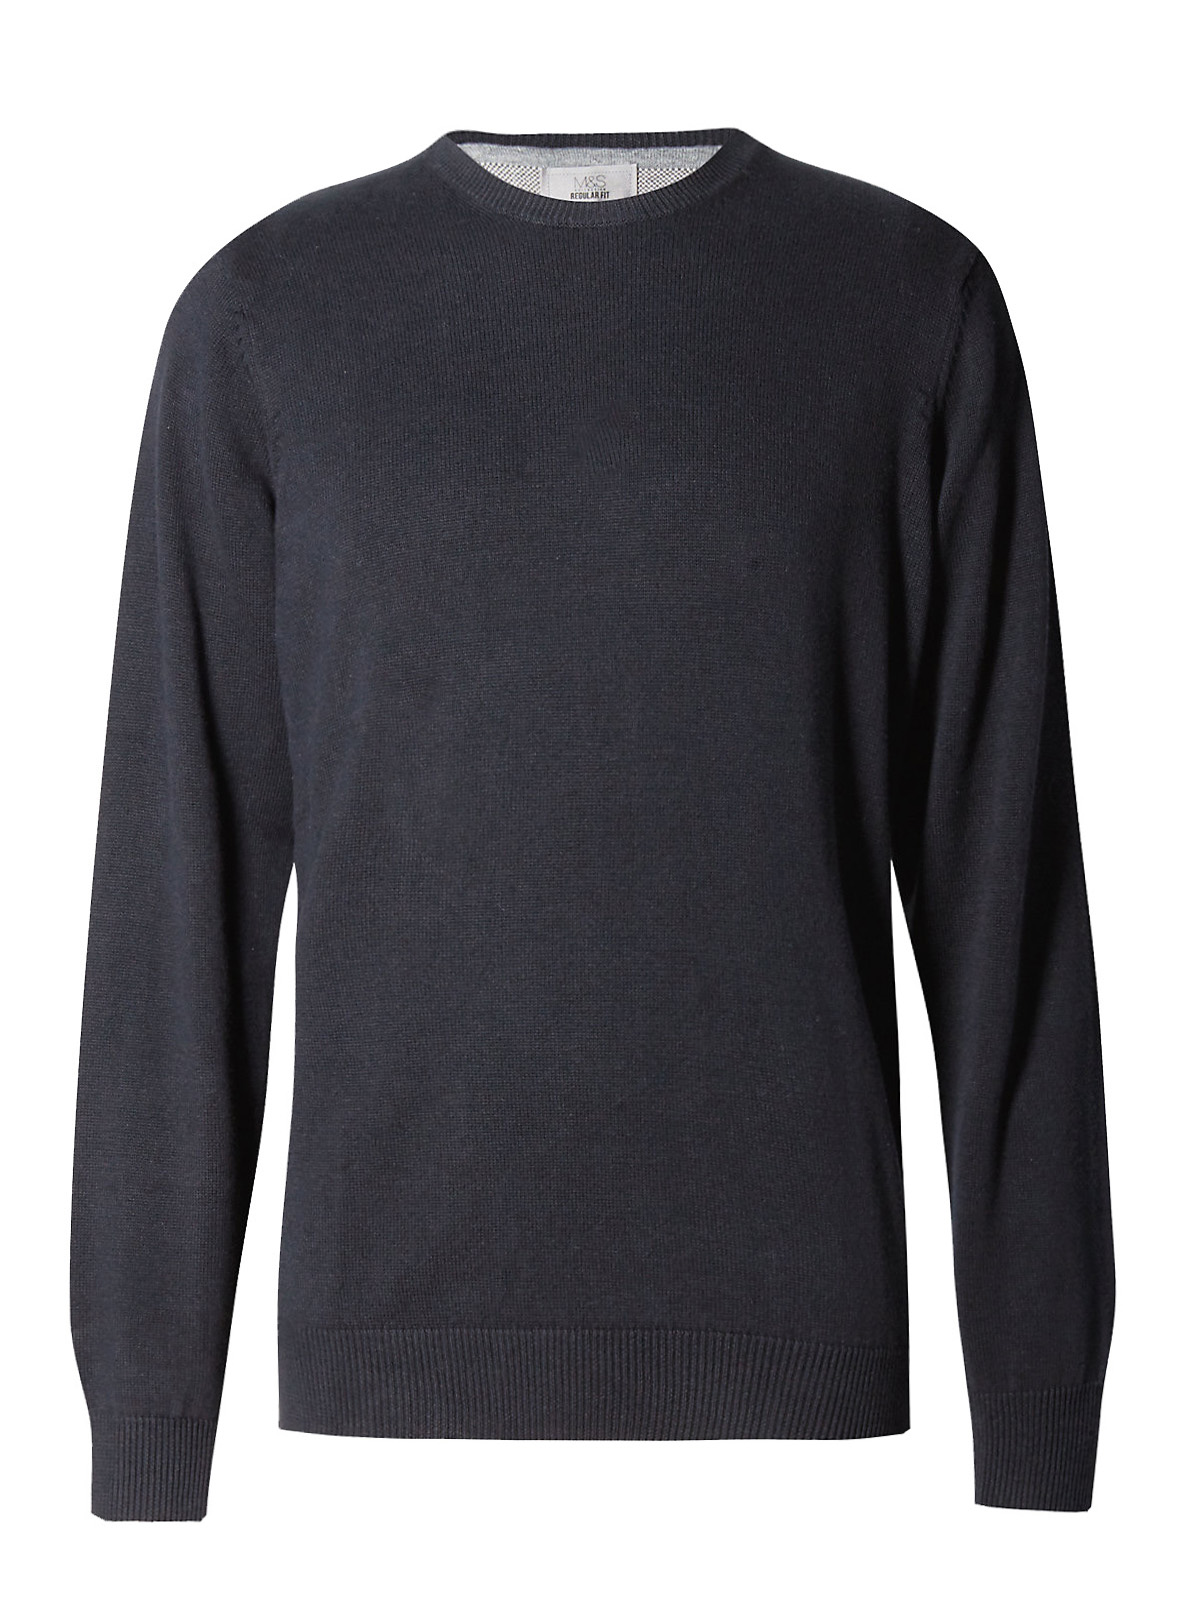 Marks and Spencer - - M&5 Mens NAVY Long Sleeve Pure Cotton Crew Neck ...